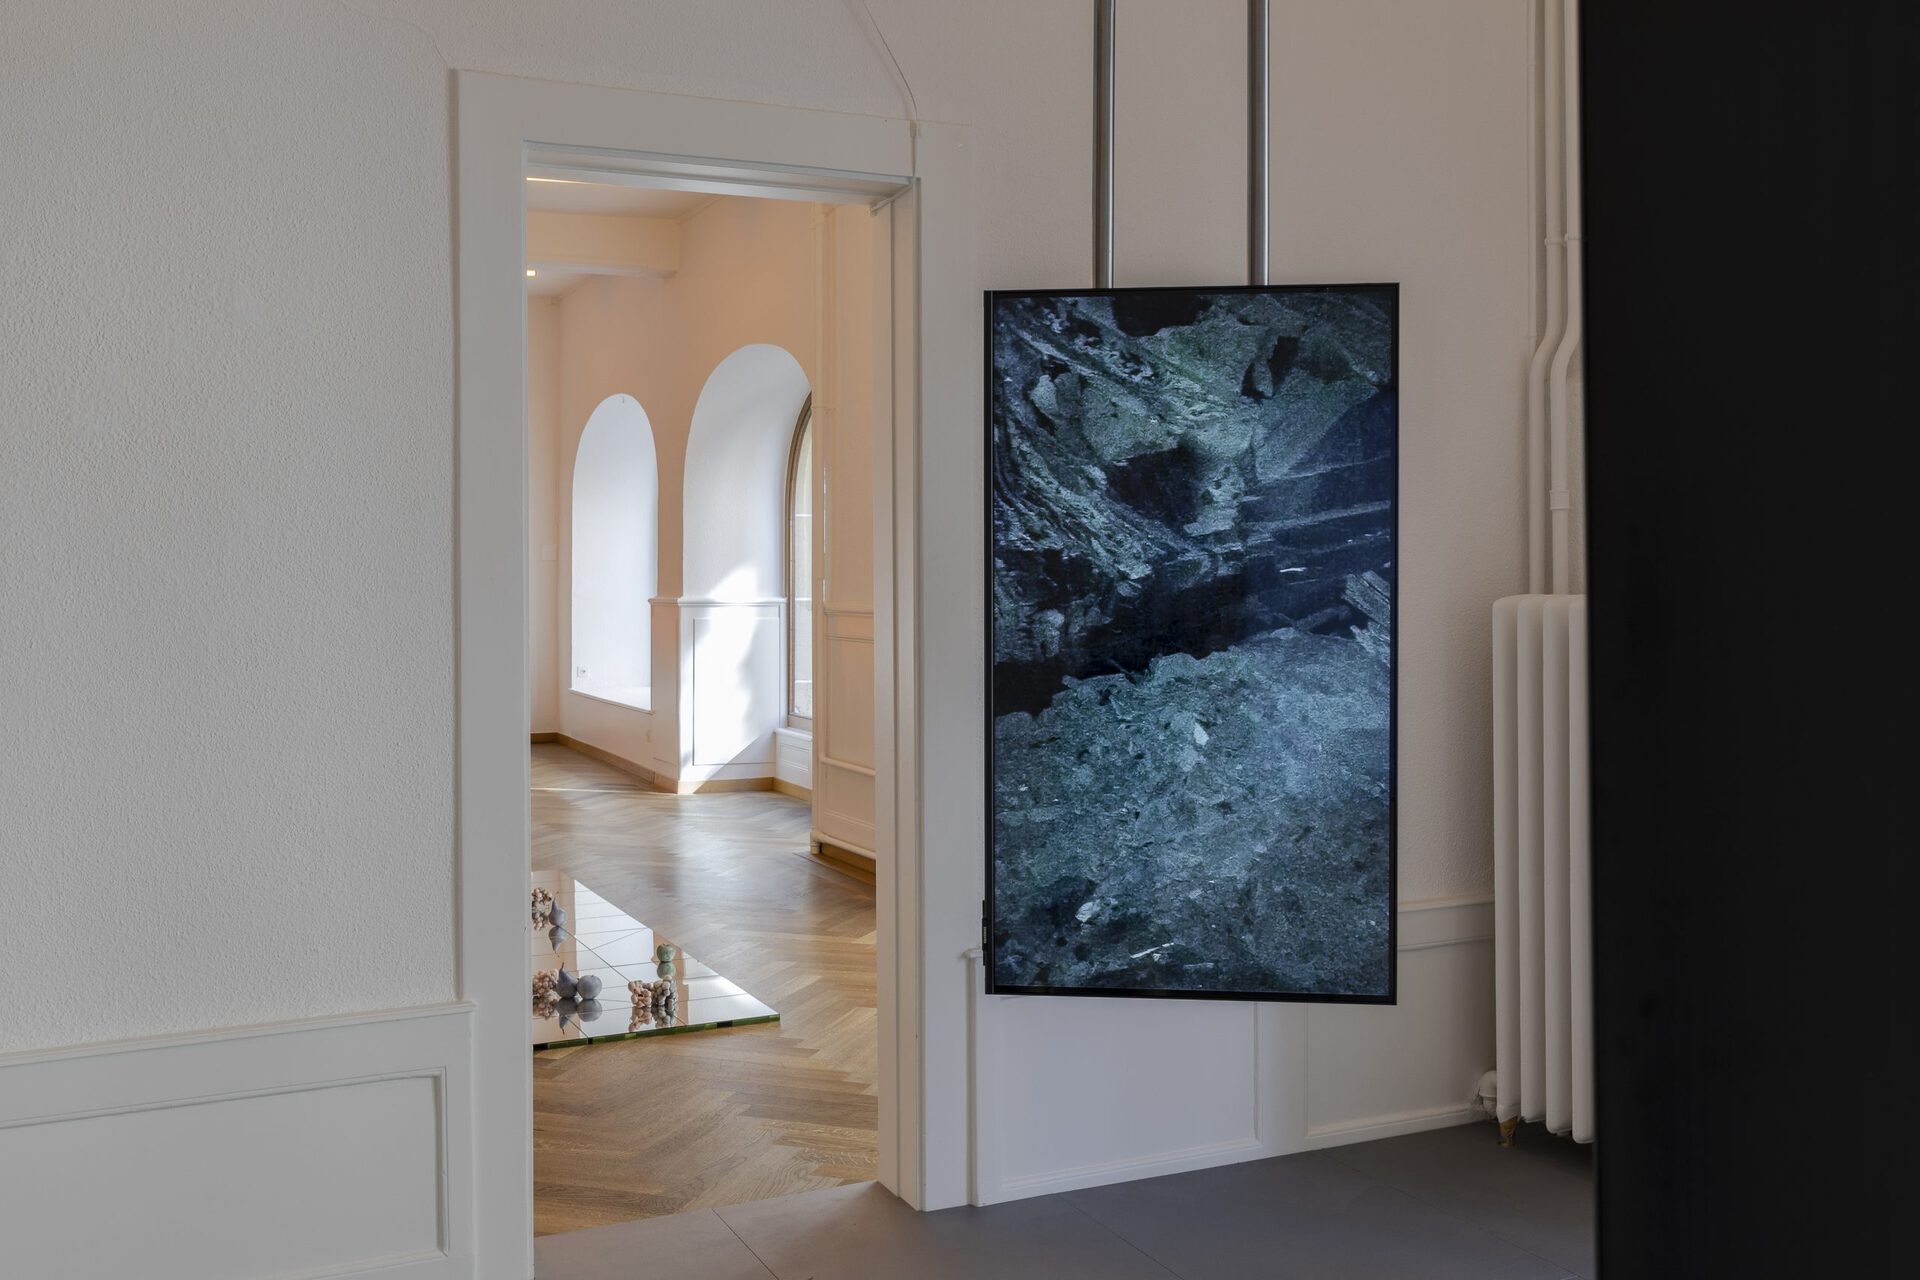 Installation views of the exhibition "Seemingly Incurable Sensation of Temporal Ambiguity" (2021) at the KRONE COURONNE / Lithic Alliance, Notes on Erasure, 2021. Photo: © Michal Florence Schorro.